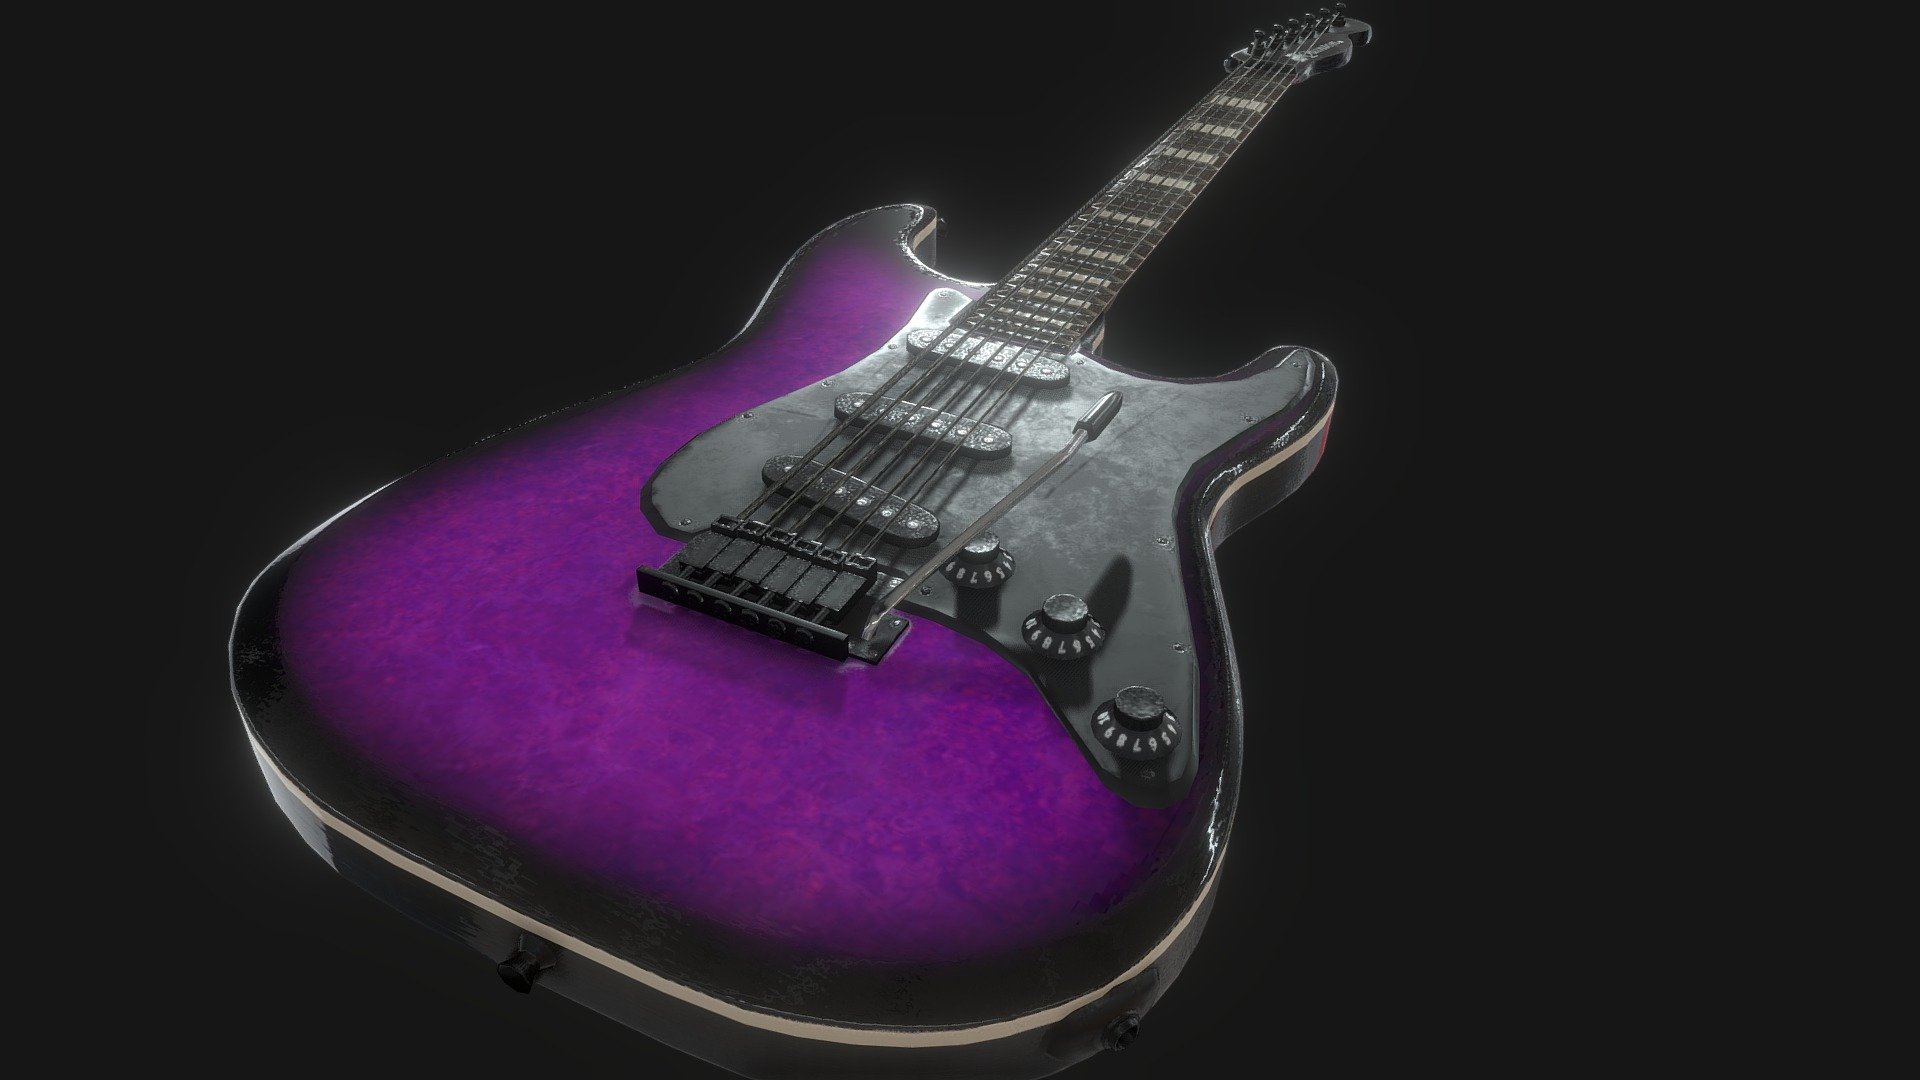 An electric guitar in the Stratocaster body style!

If you buy any of my electric guitars, the texture sets are interchangeable across all 5 models!

Designed for games in Low-poly PBR including Albedo, Normal, Metallic, AO, and Roughness 4K textures.

This model from Ferocious Industries can be found in 10 different material skins, and this one uses the ‘Hard Rock Purple' texture set.

4793 Triangles 3d model